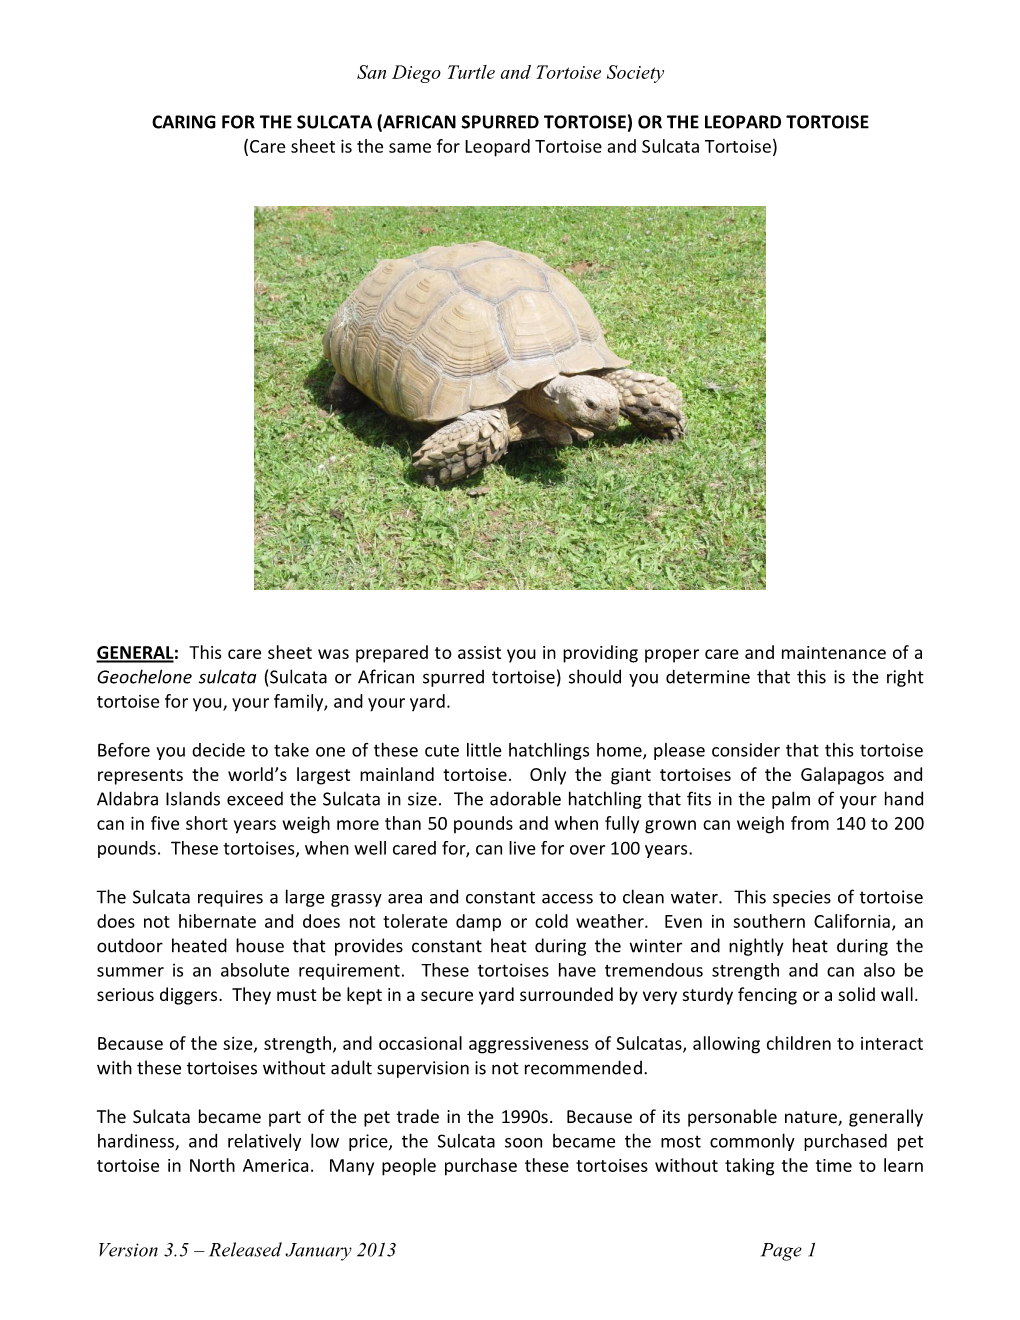 African Spurred Tortoise Care Sheet